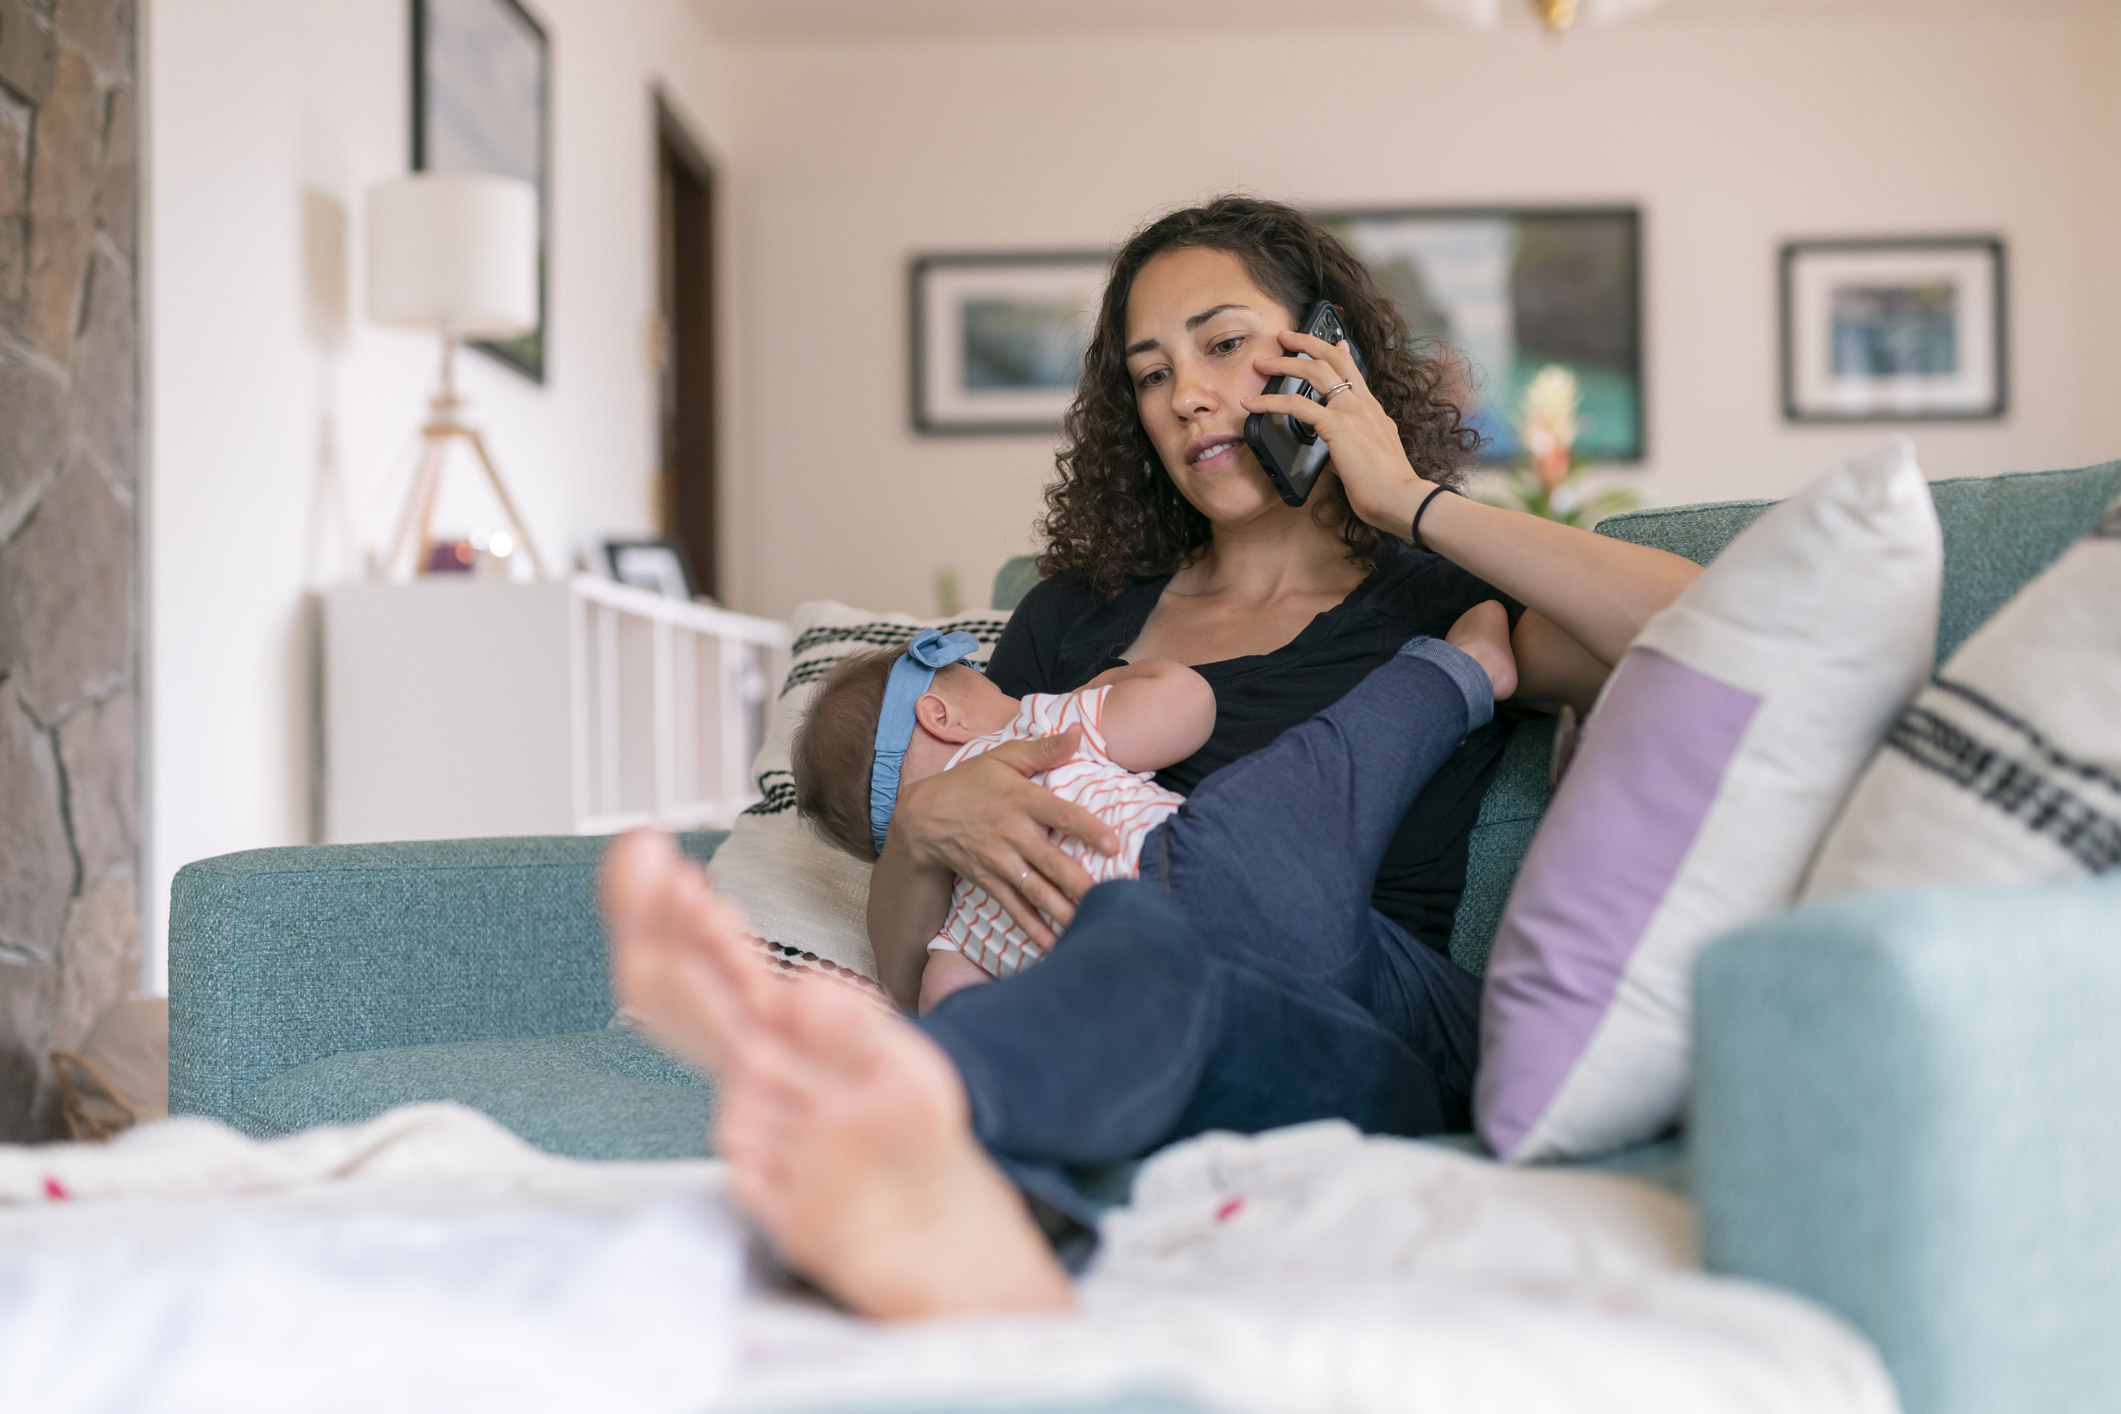 A woman on the phone while breastfeeding